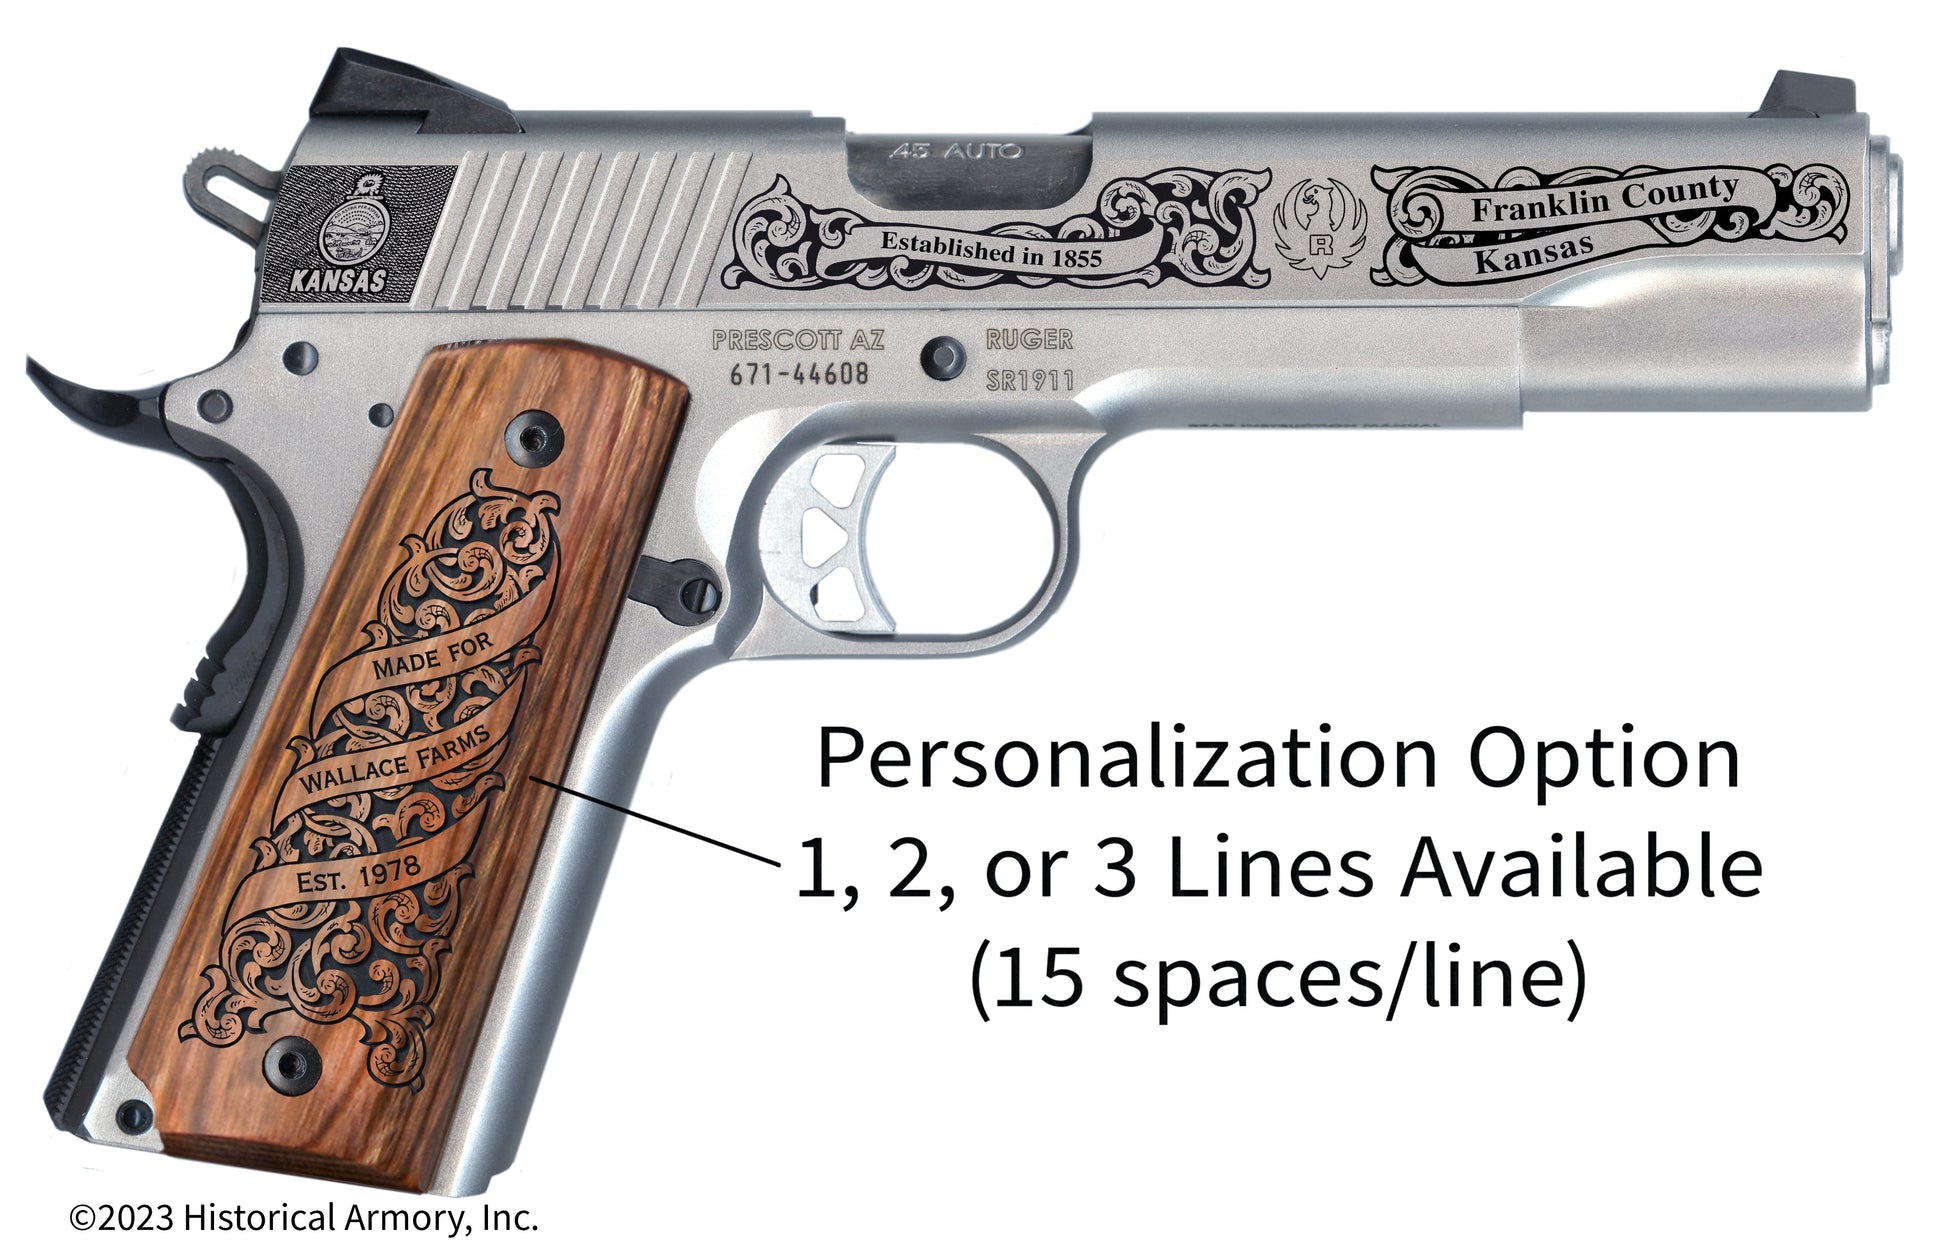 Franklin County Kansas Personalized Engraved .45 Auto Ruger 1911